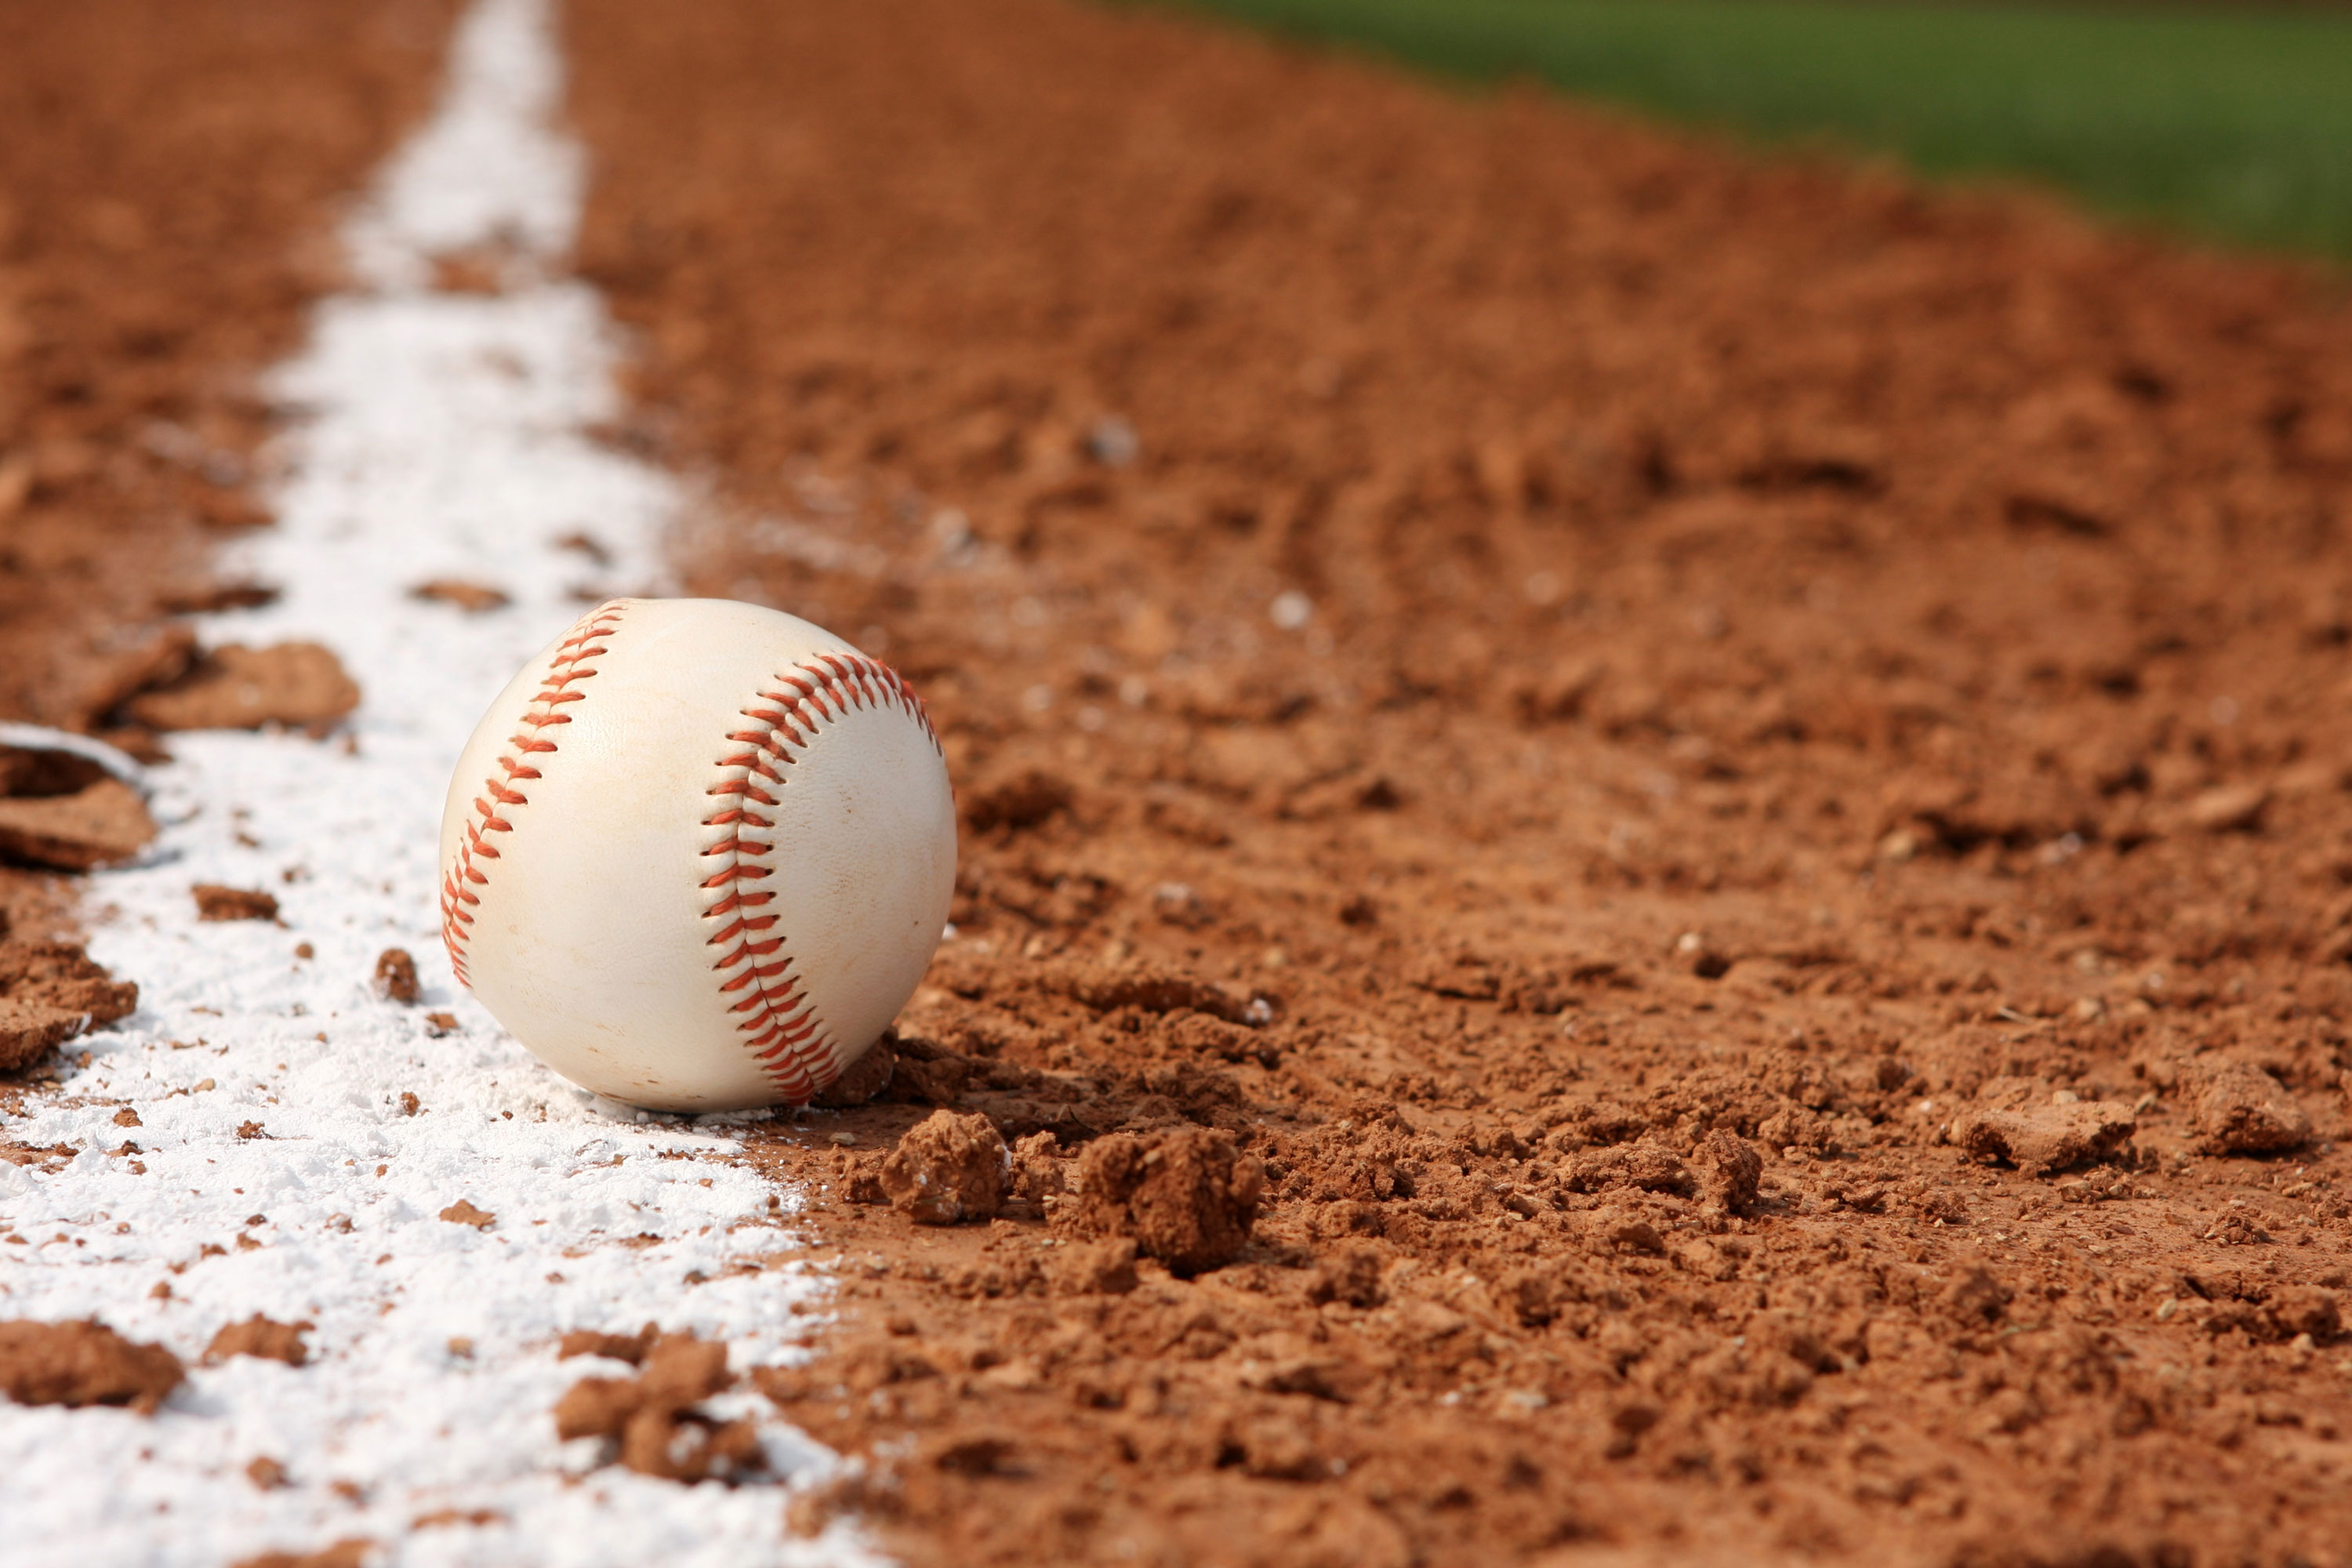 Baseball sits on the dirt touching the white line